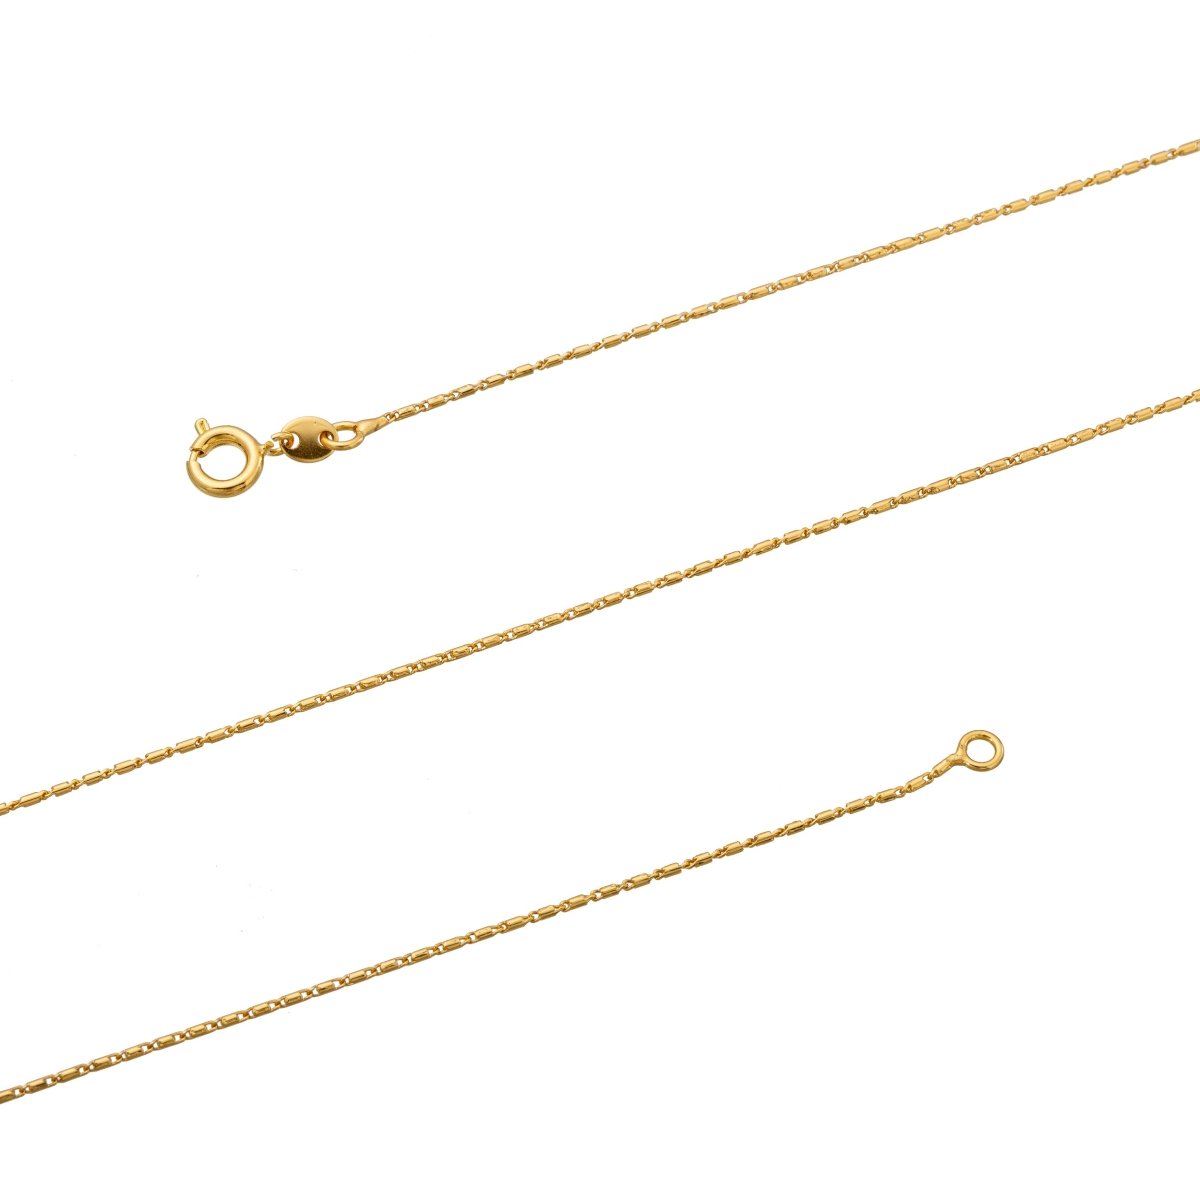 24K Gold Filled Scrooll Necklace Chain. 19.5 inch Unique Finished Necklace For Jewelry Making, Dainty 1.8mm Unique Necklace w/ Spring Ring | CN-300 Clearance Pricing - DLUXCA